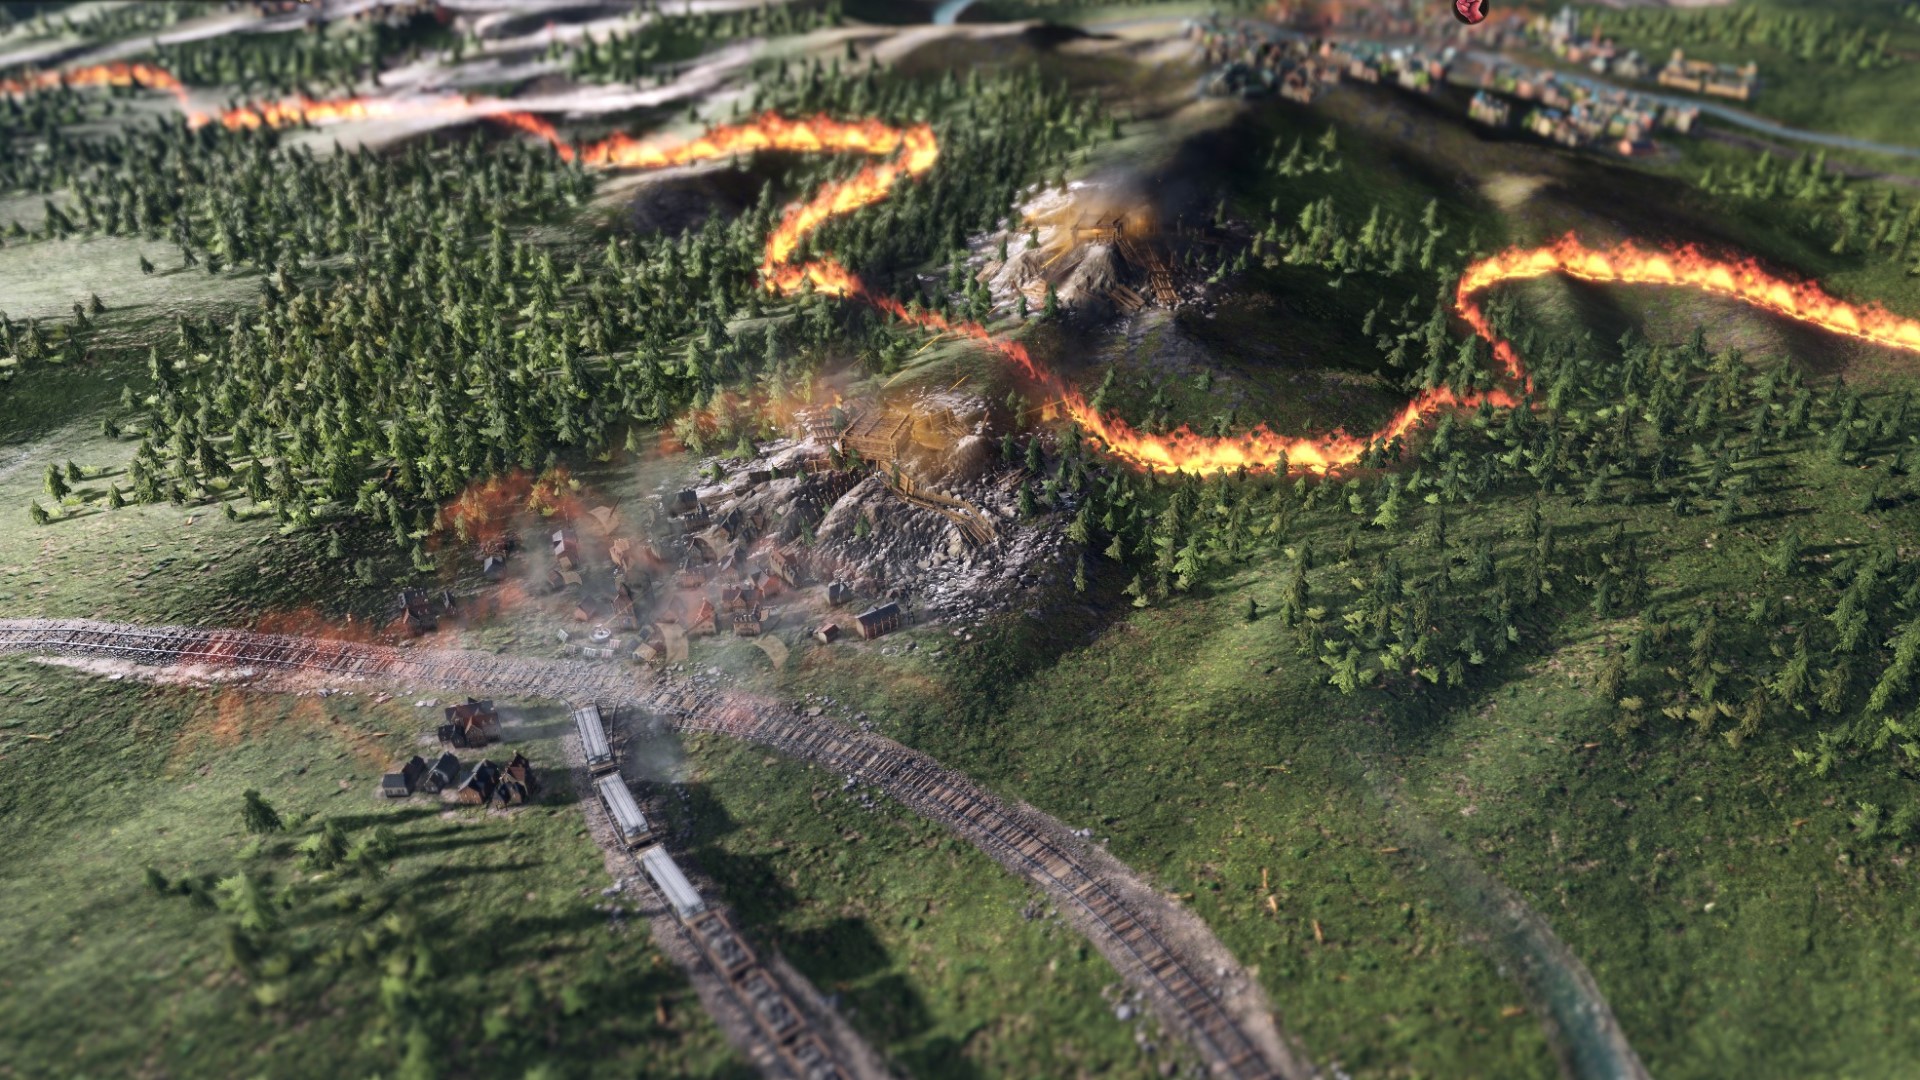 Victoria 3 review: A line of fire cutting across a mountainside indicates an active war front in Victoria 3